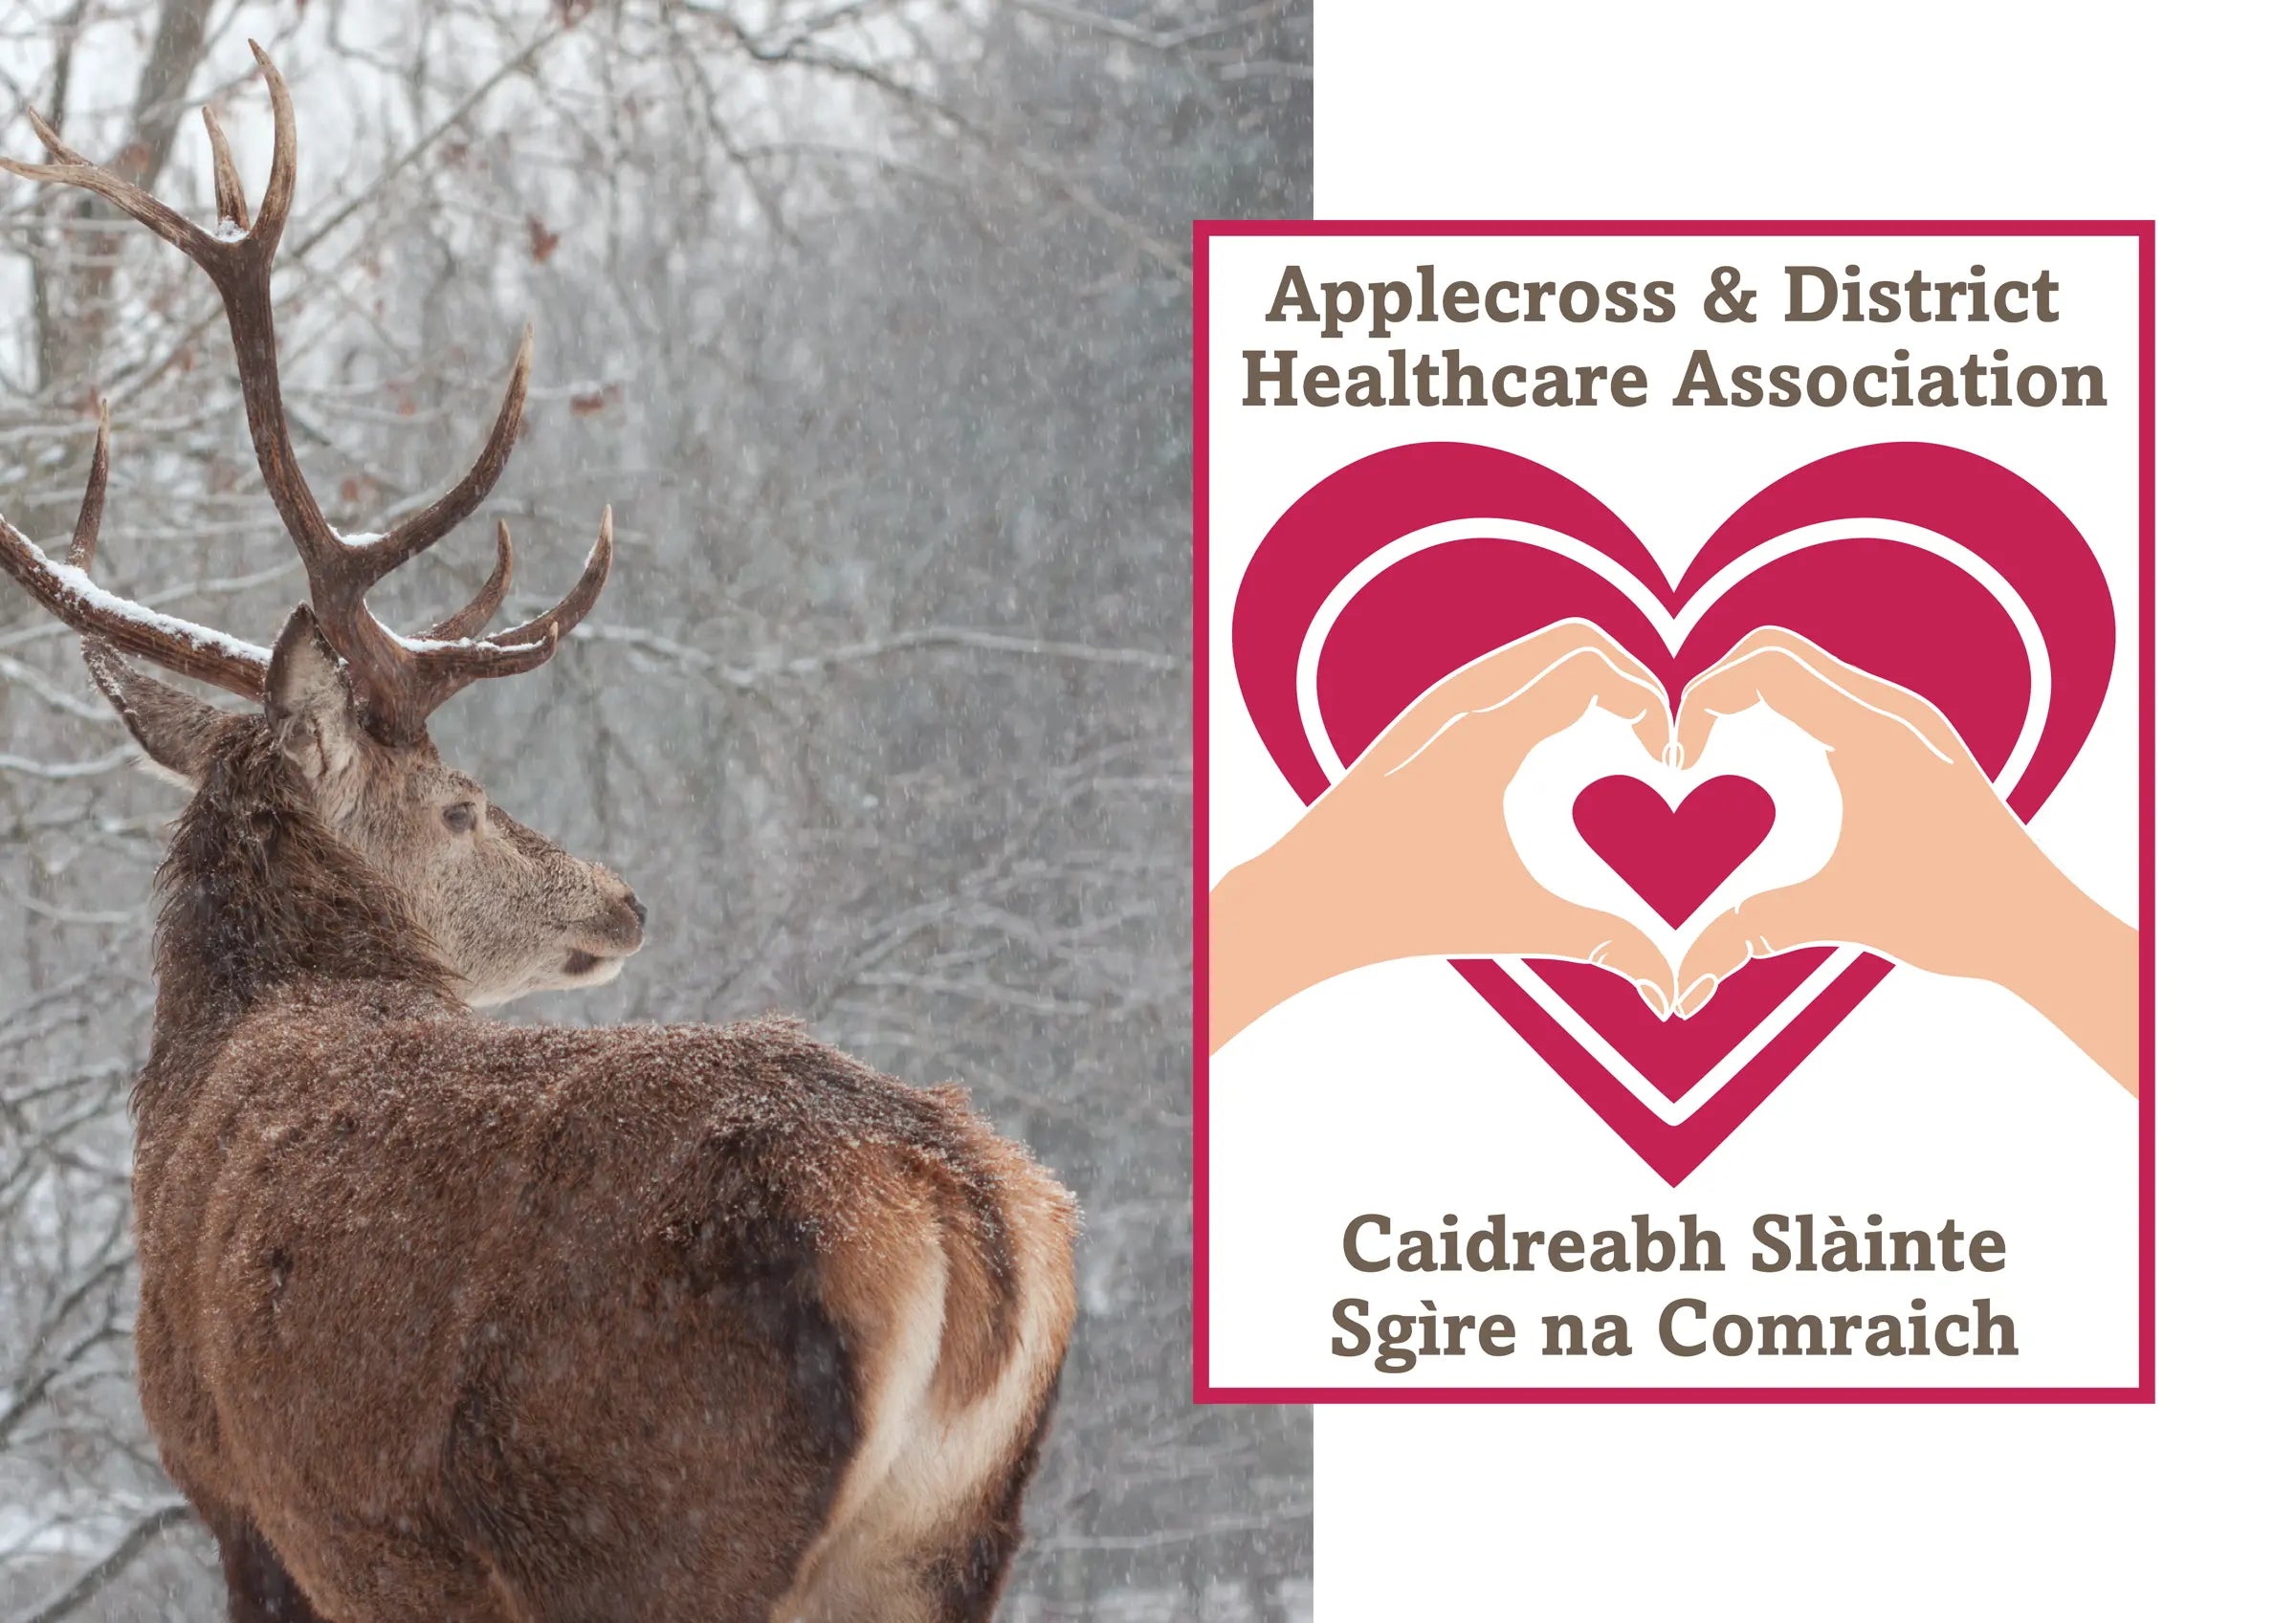 A share of profits from the stag cards will go to charity